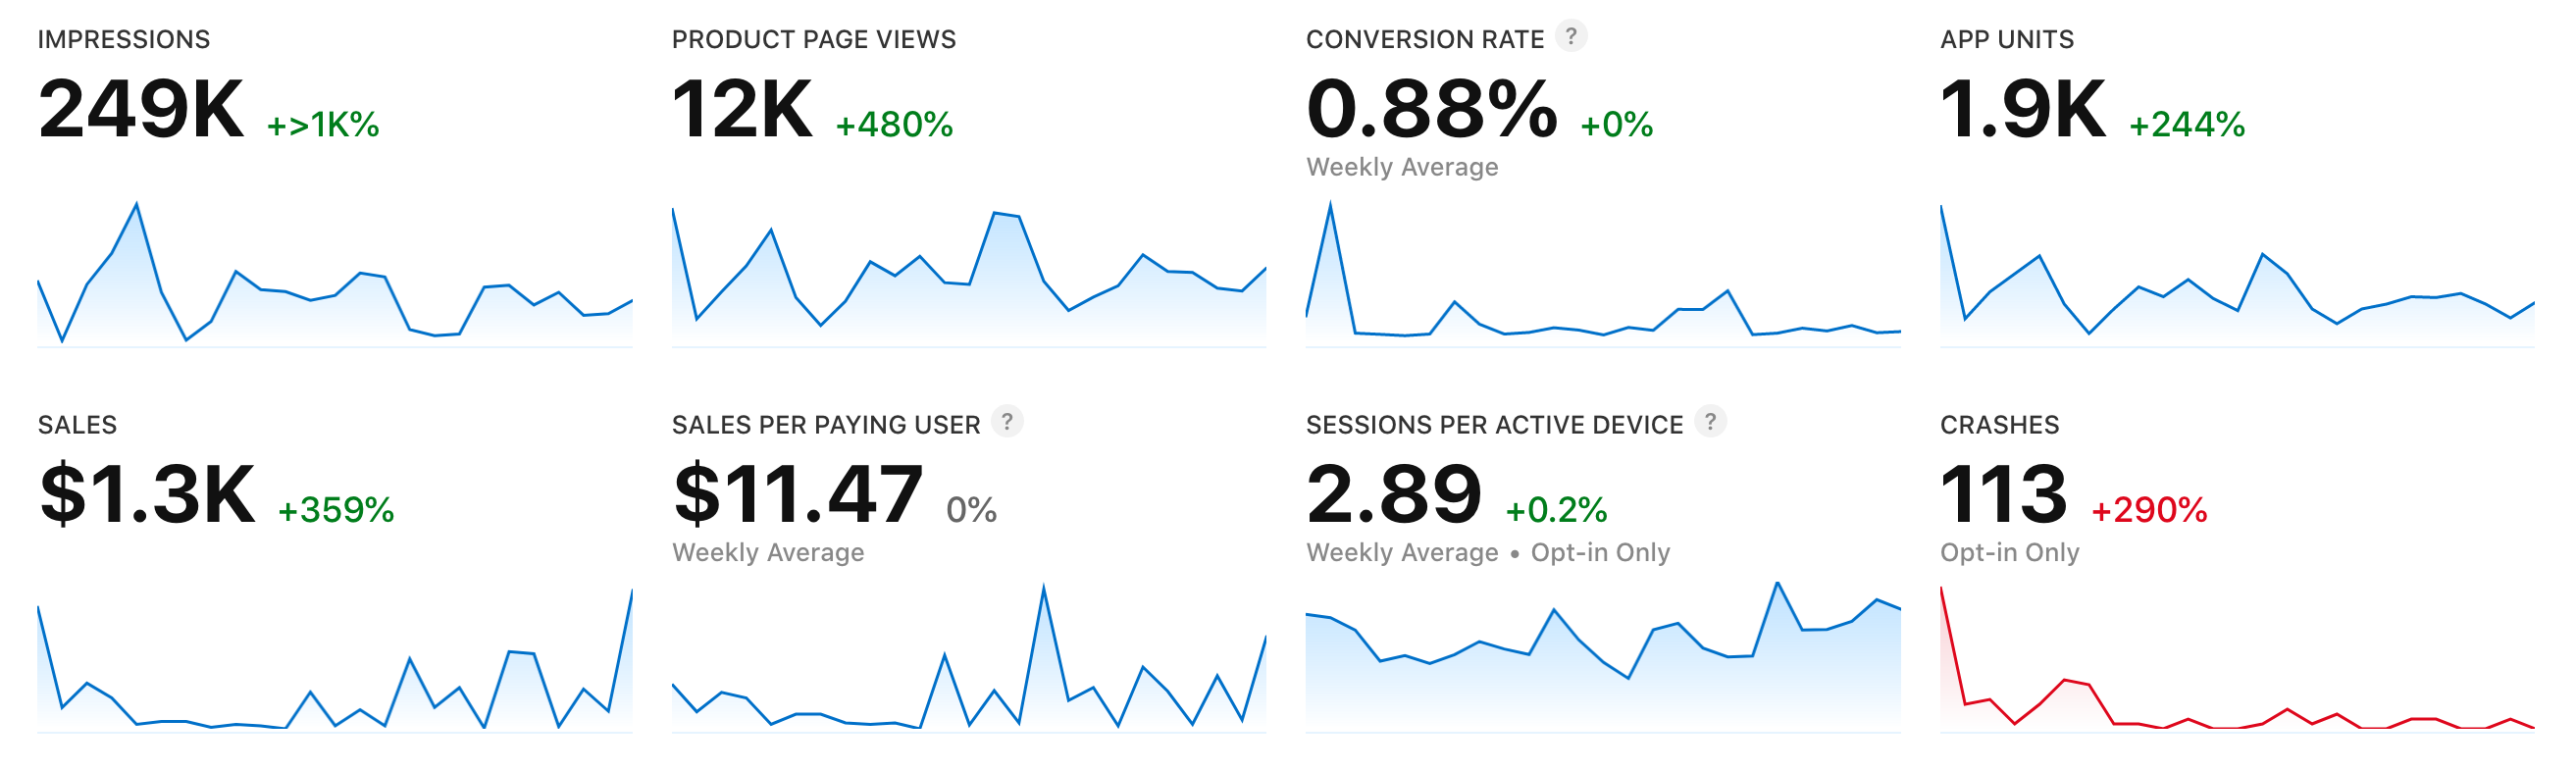 A series of graphs indicating Relate's metrics for impressions (249k), product page views (12k), conversion rate (.88%), app units (1.9k), sales ($1.3k), sales per paying user ($11.47), and sessions per active device (2.89)